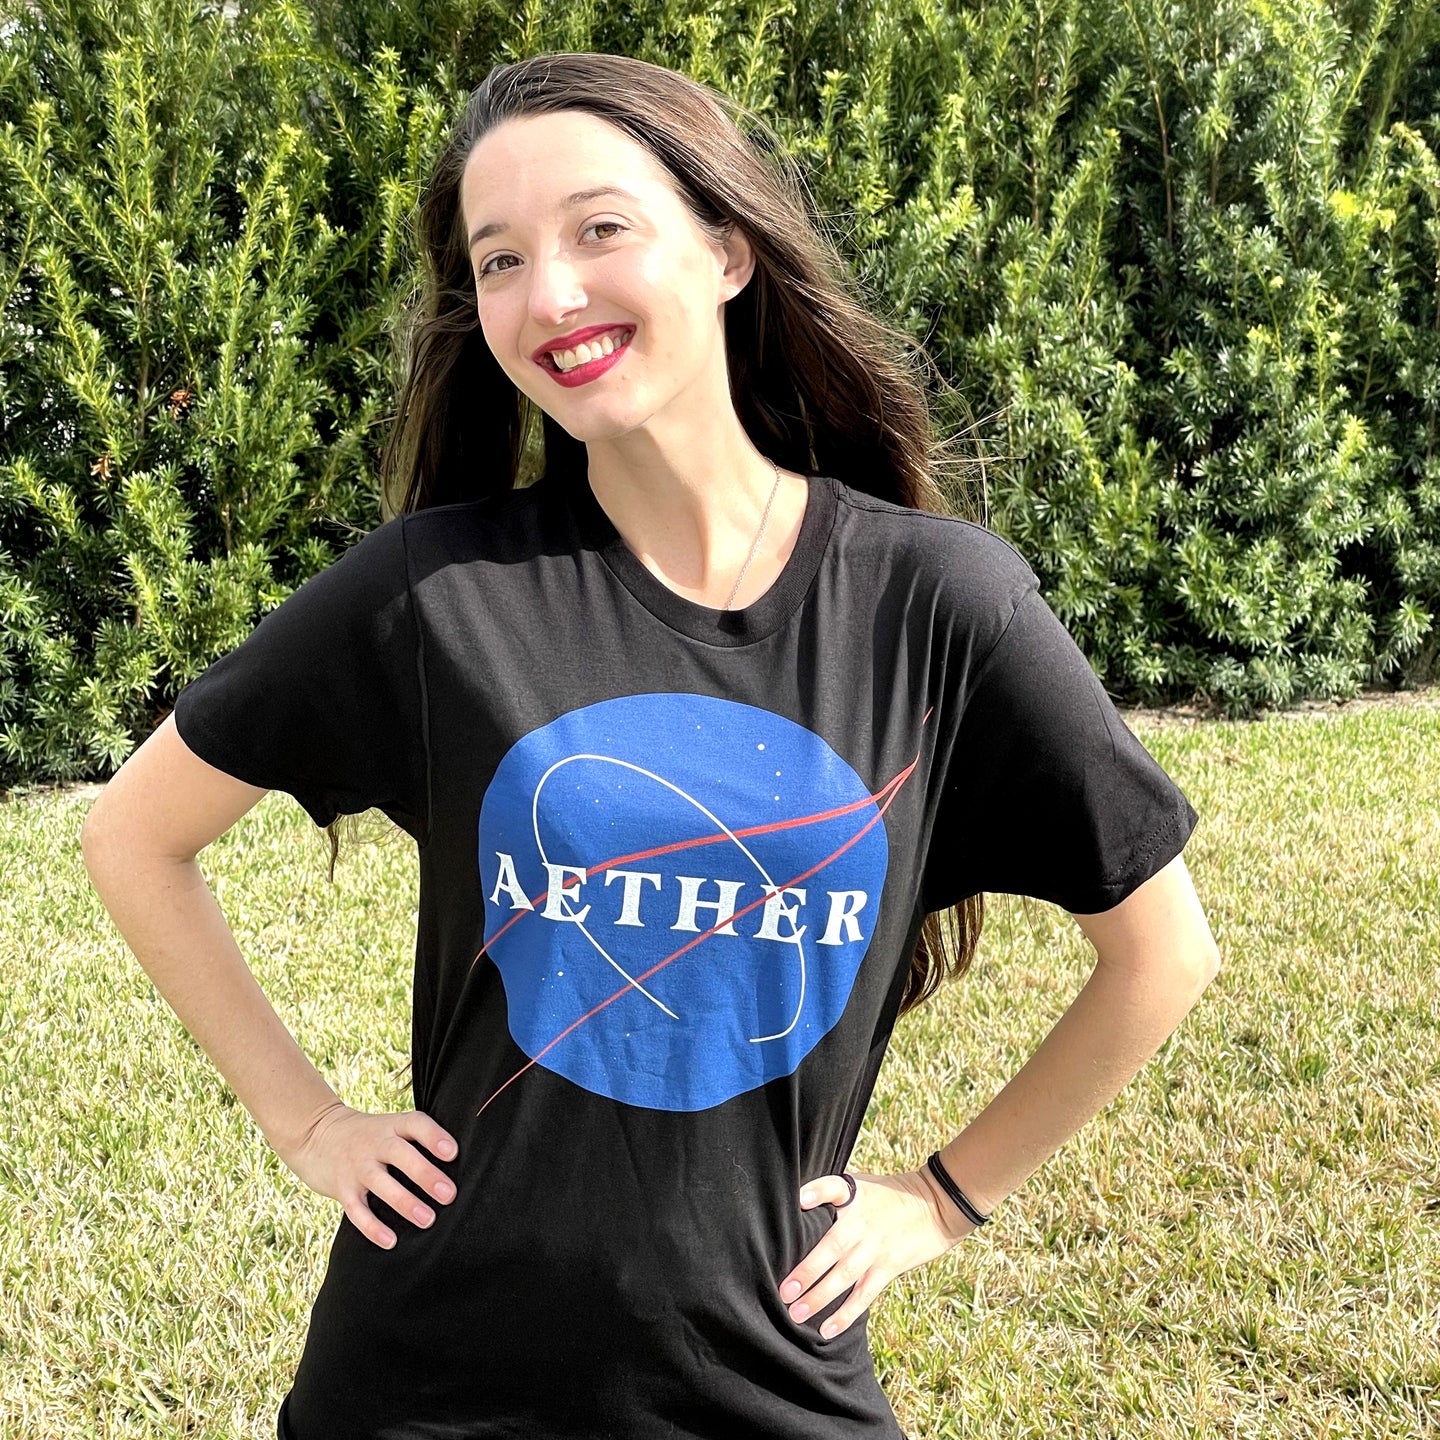 Aether T-shirt